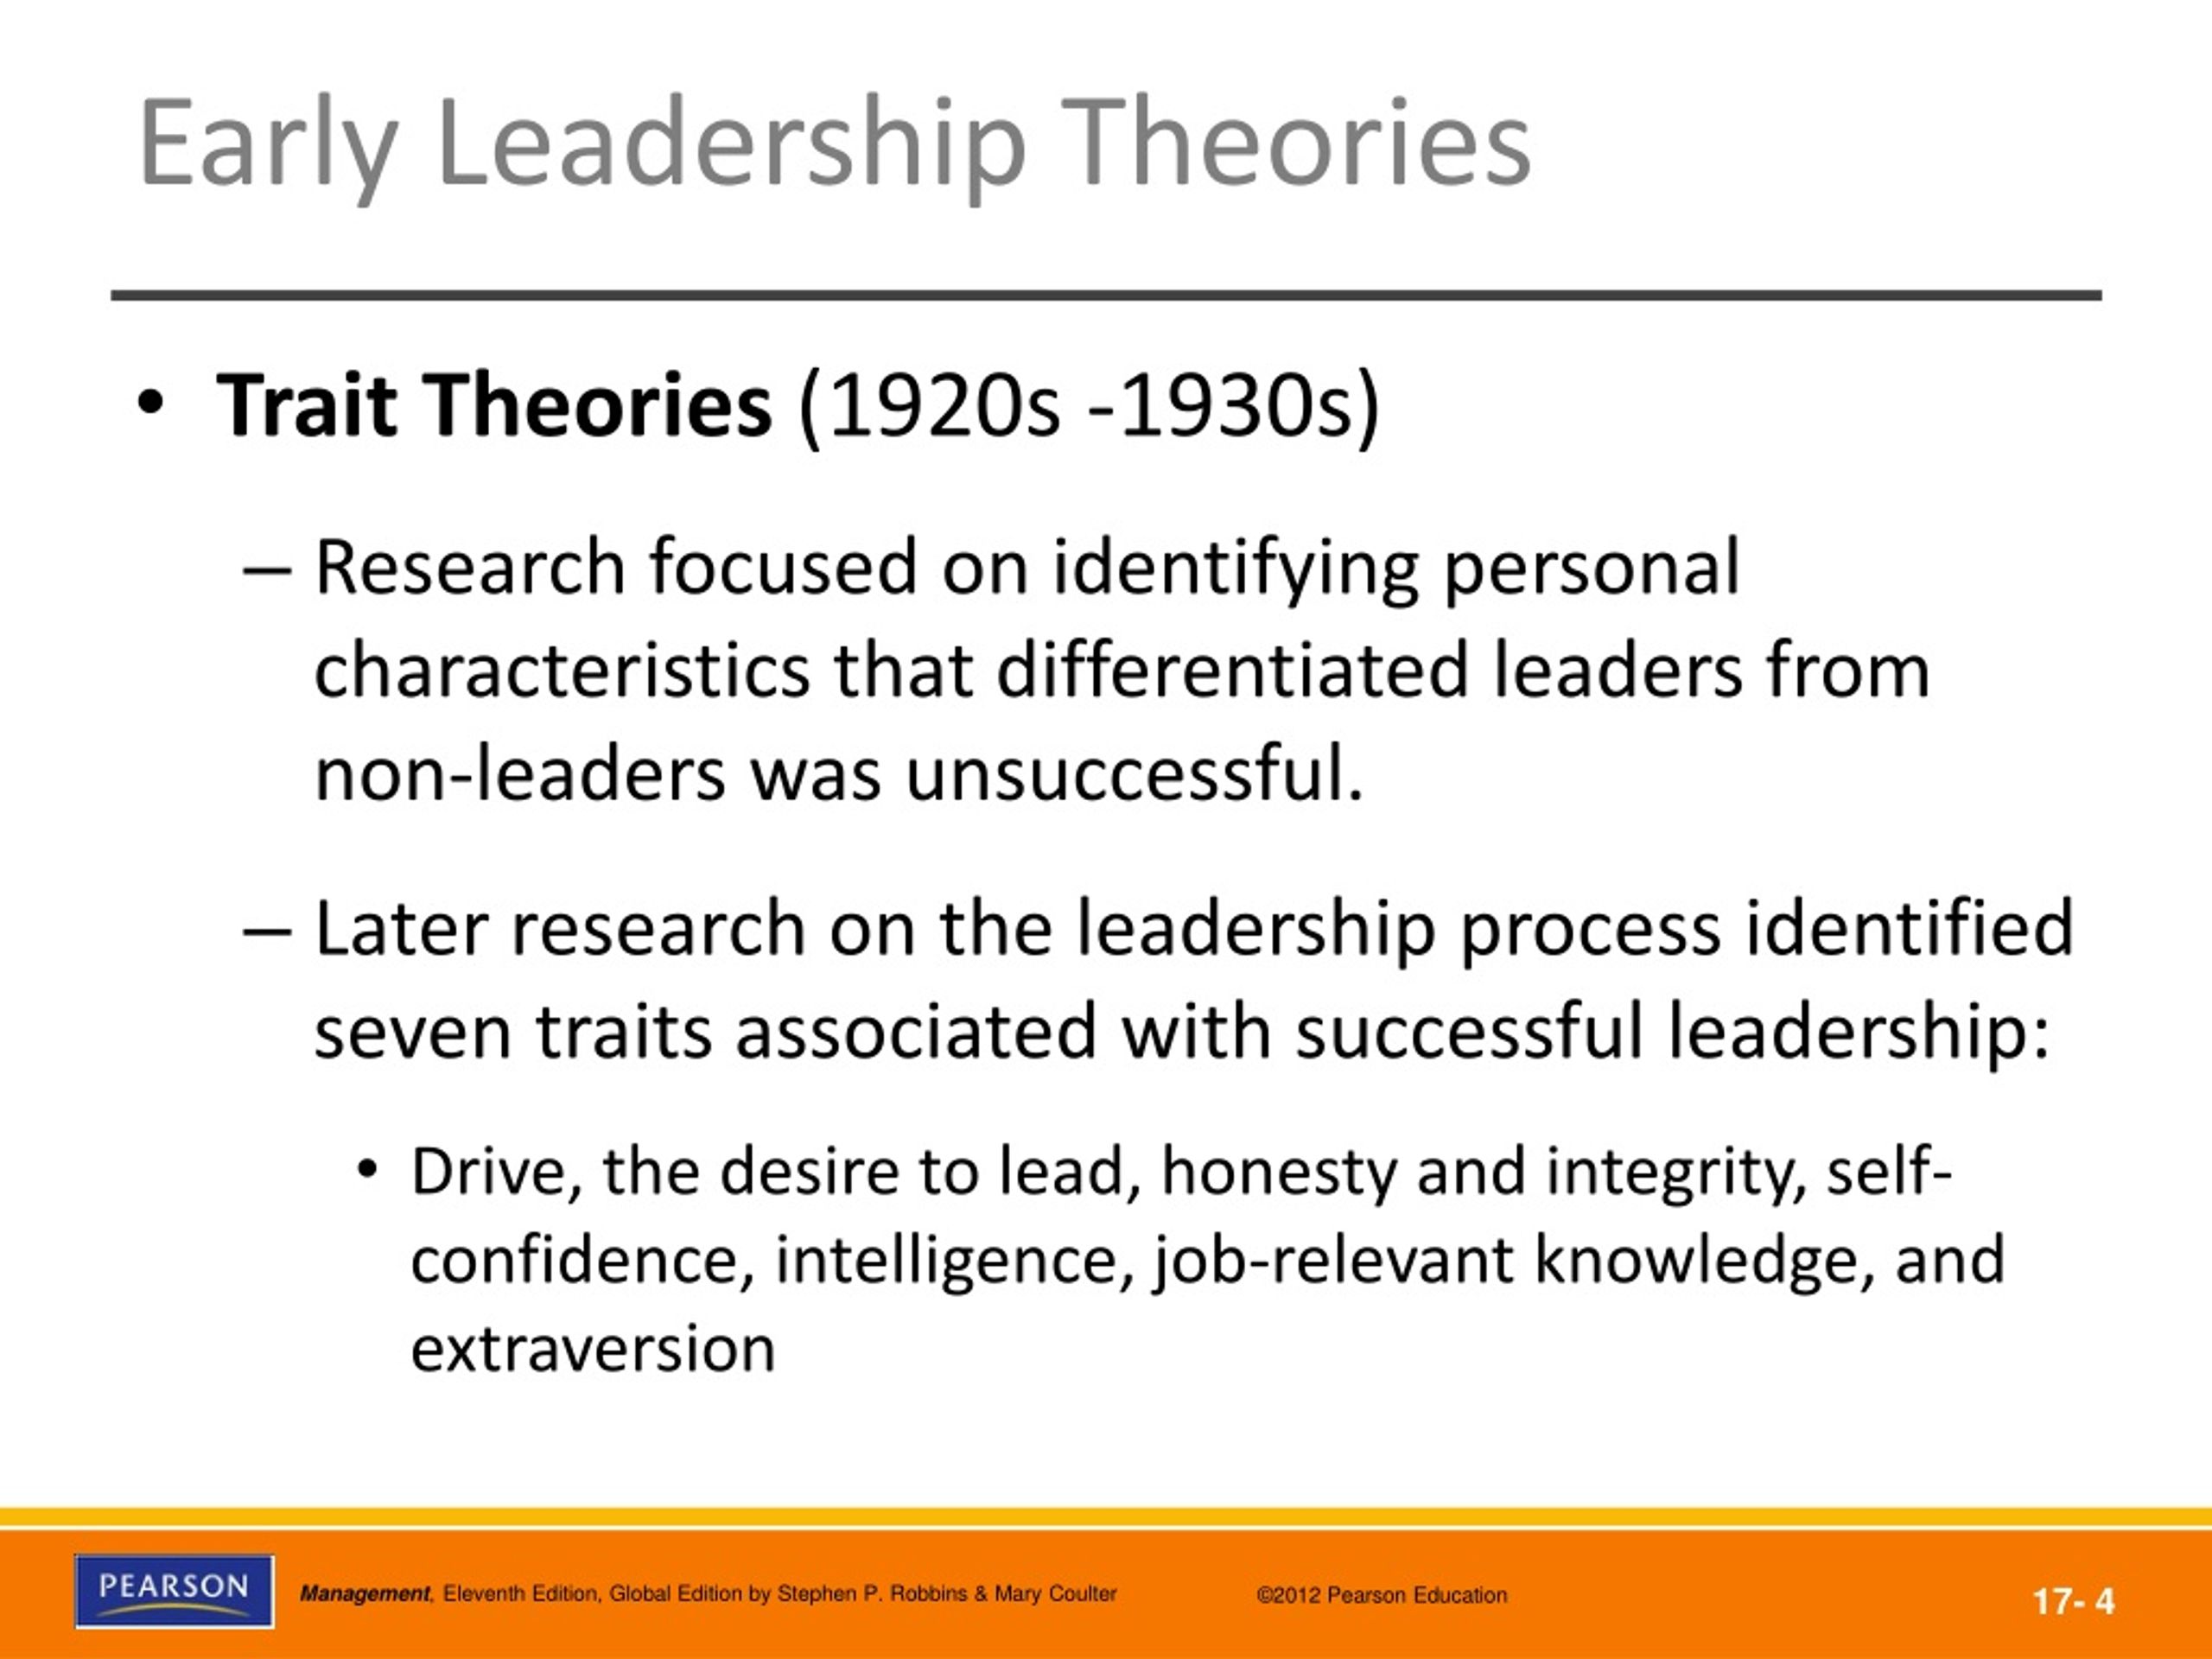 Compare And Contrast Theories Of Leadership